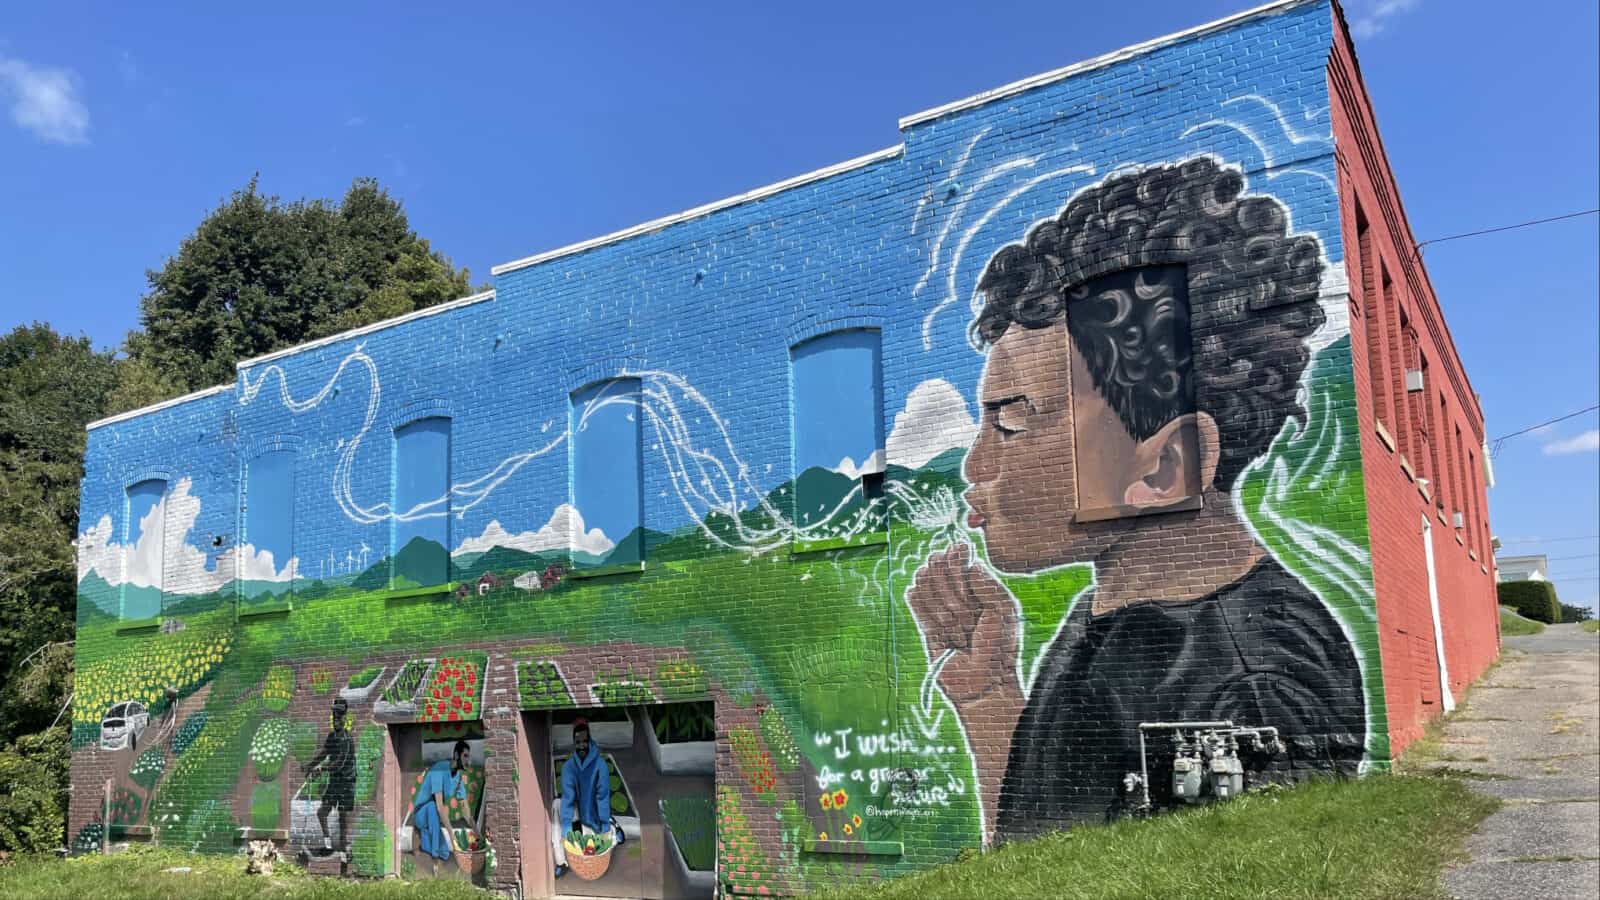 A boy blows a dandelion clock, letting the seeds fly in a wish for a greener future, in a mural near Riverside Park in Pittsfield.